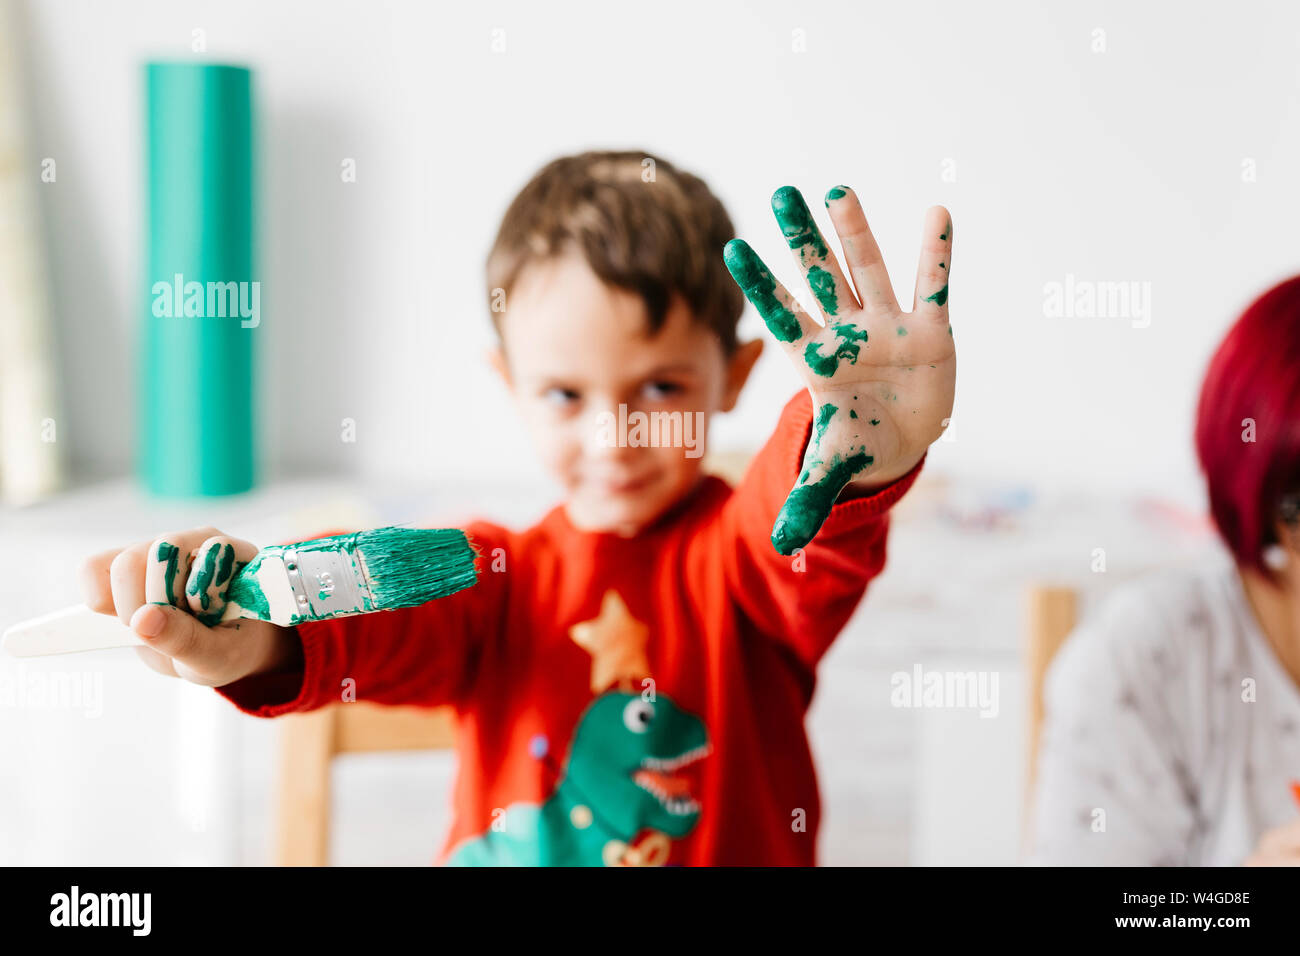 Boy showing a brush in one hand and the other painted green while doing crafts at home Stock Photo